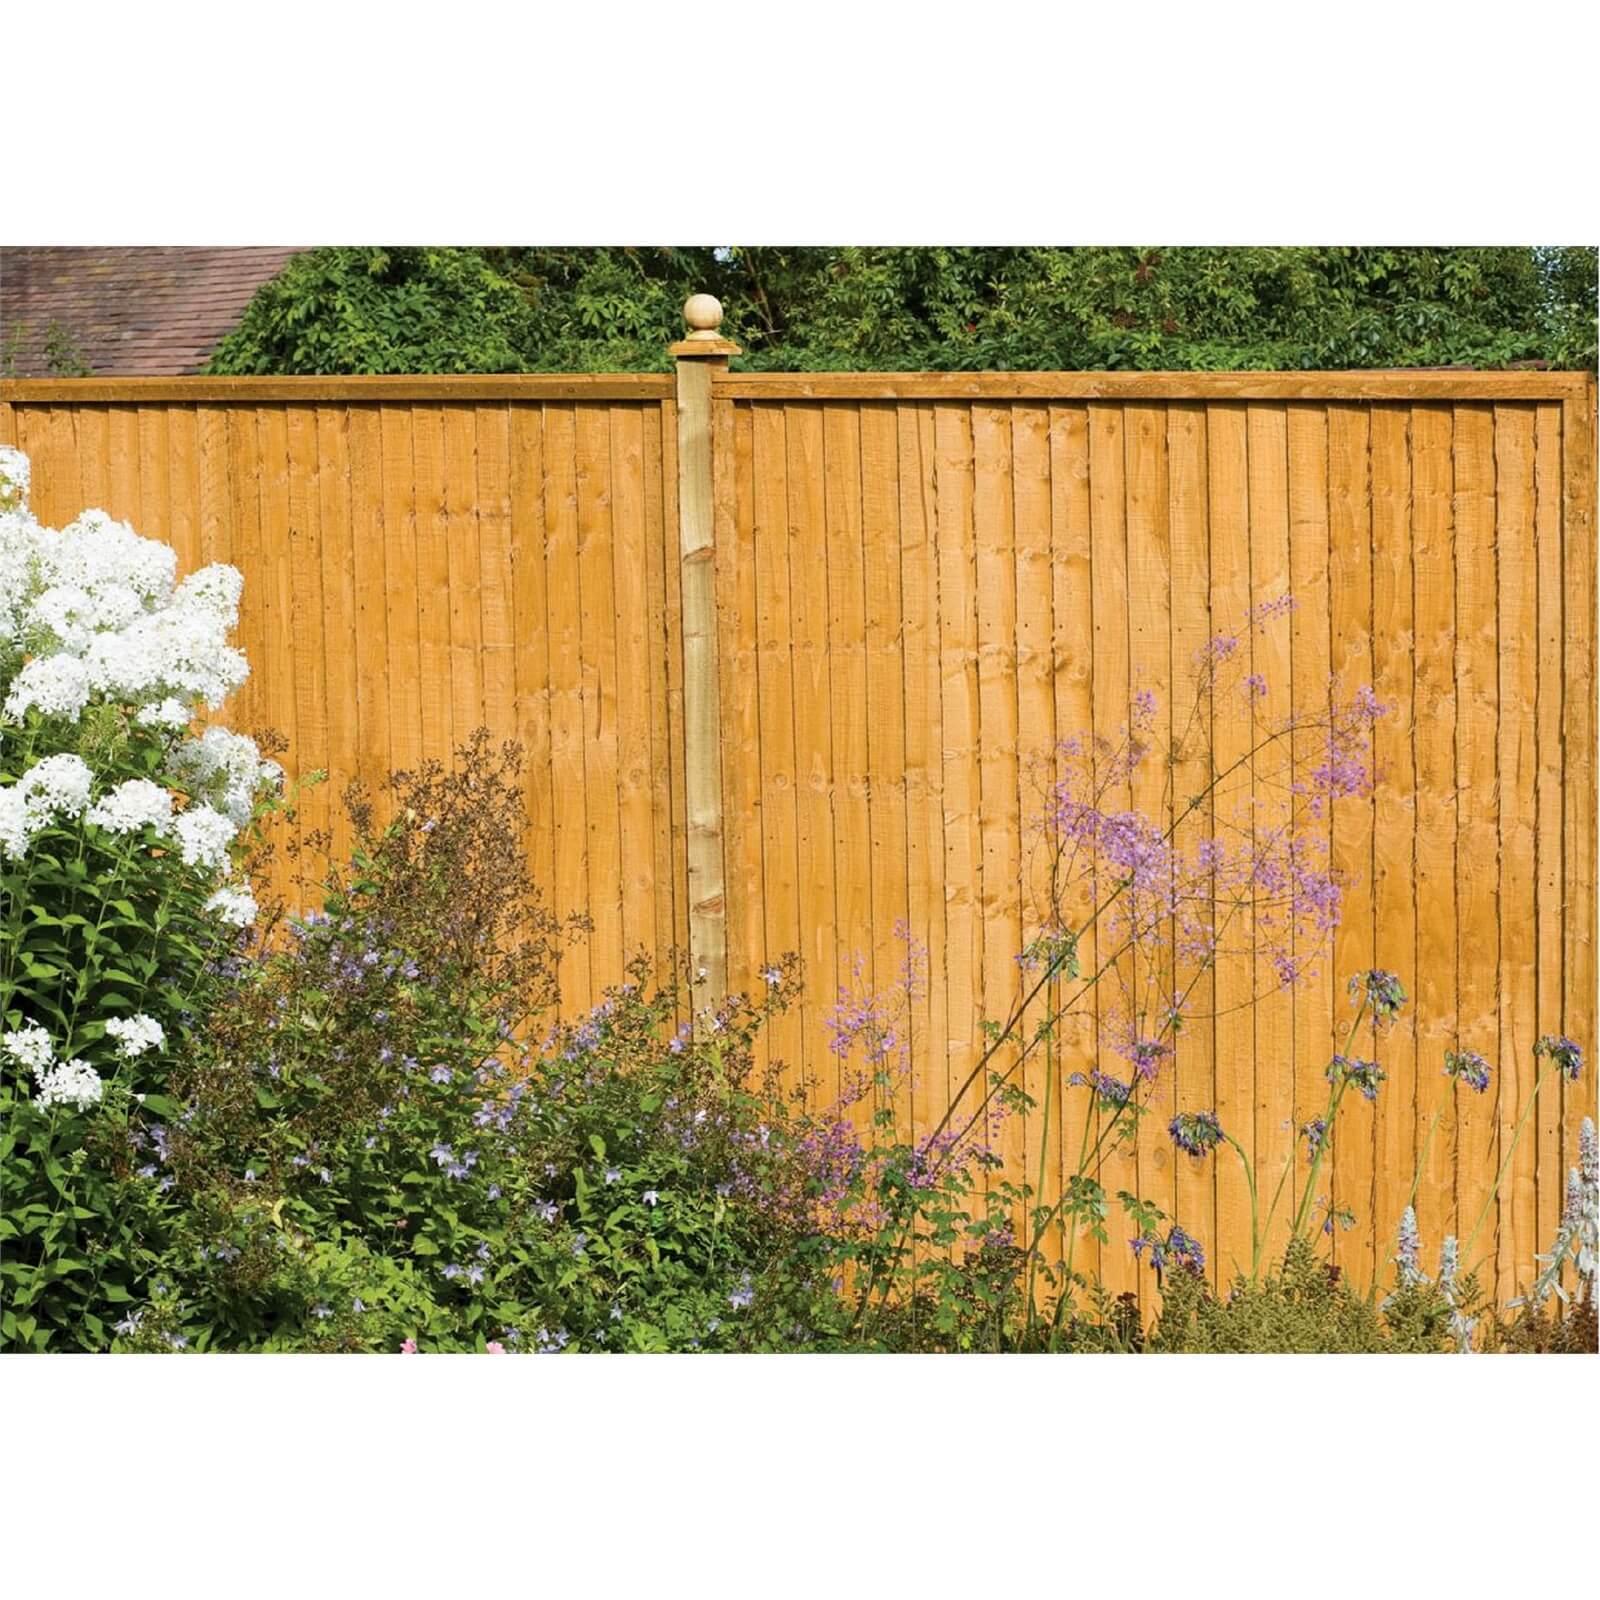 Forest Larchlap Closeboard 1.2m Fence Panel - Pack of 5